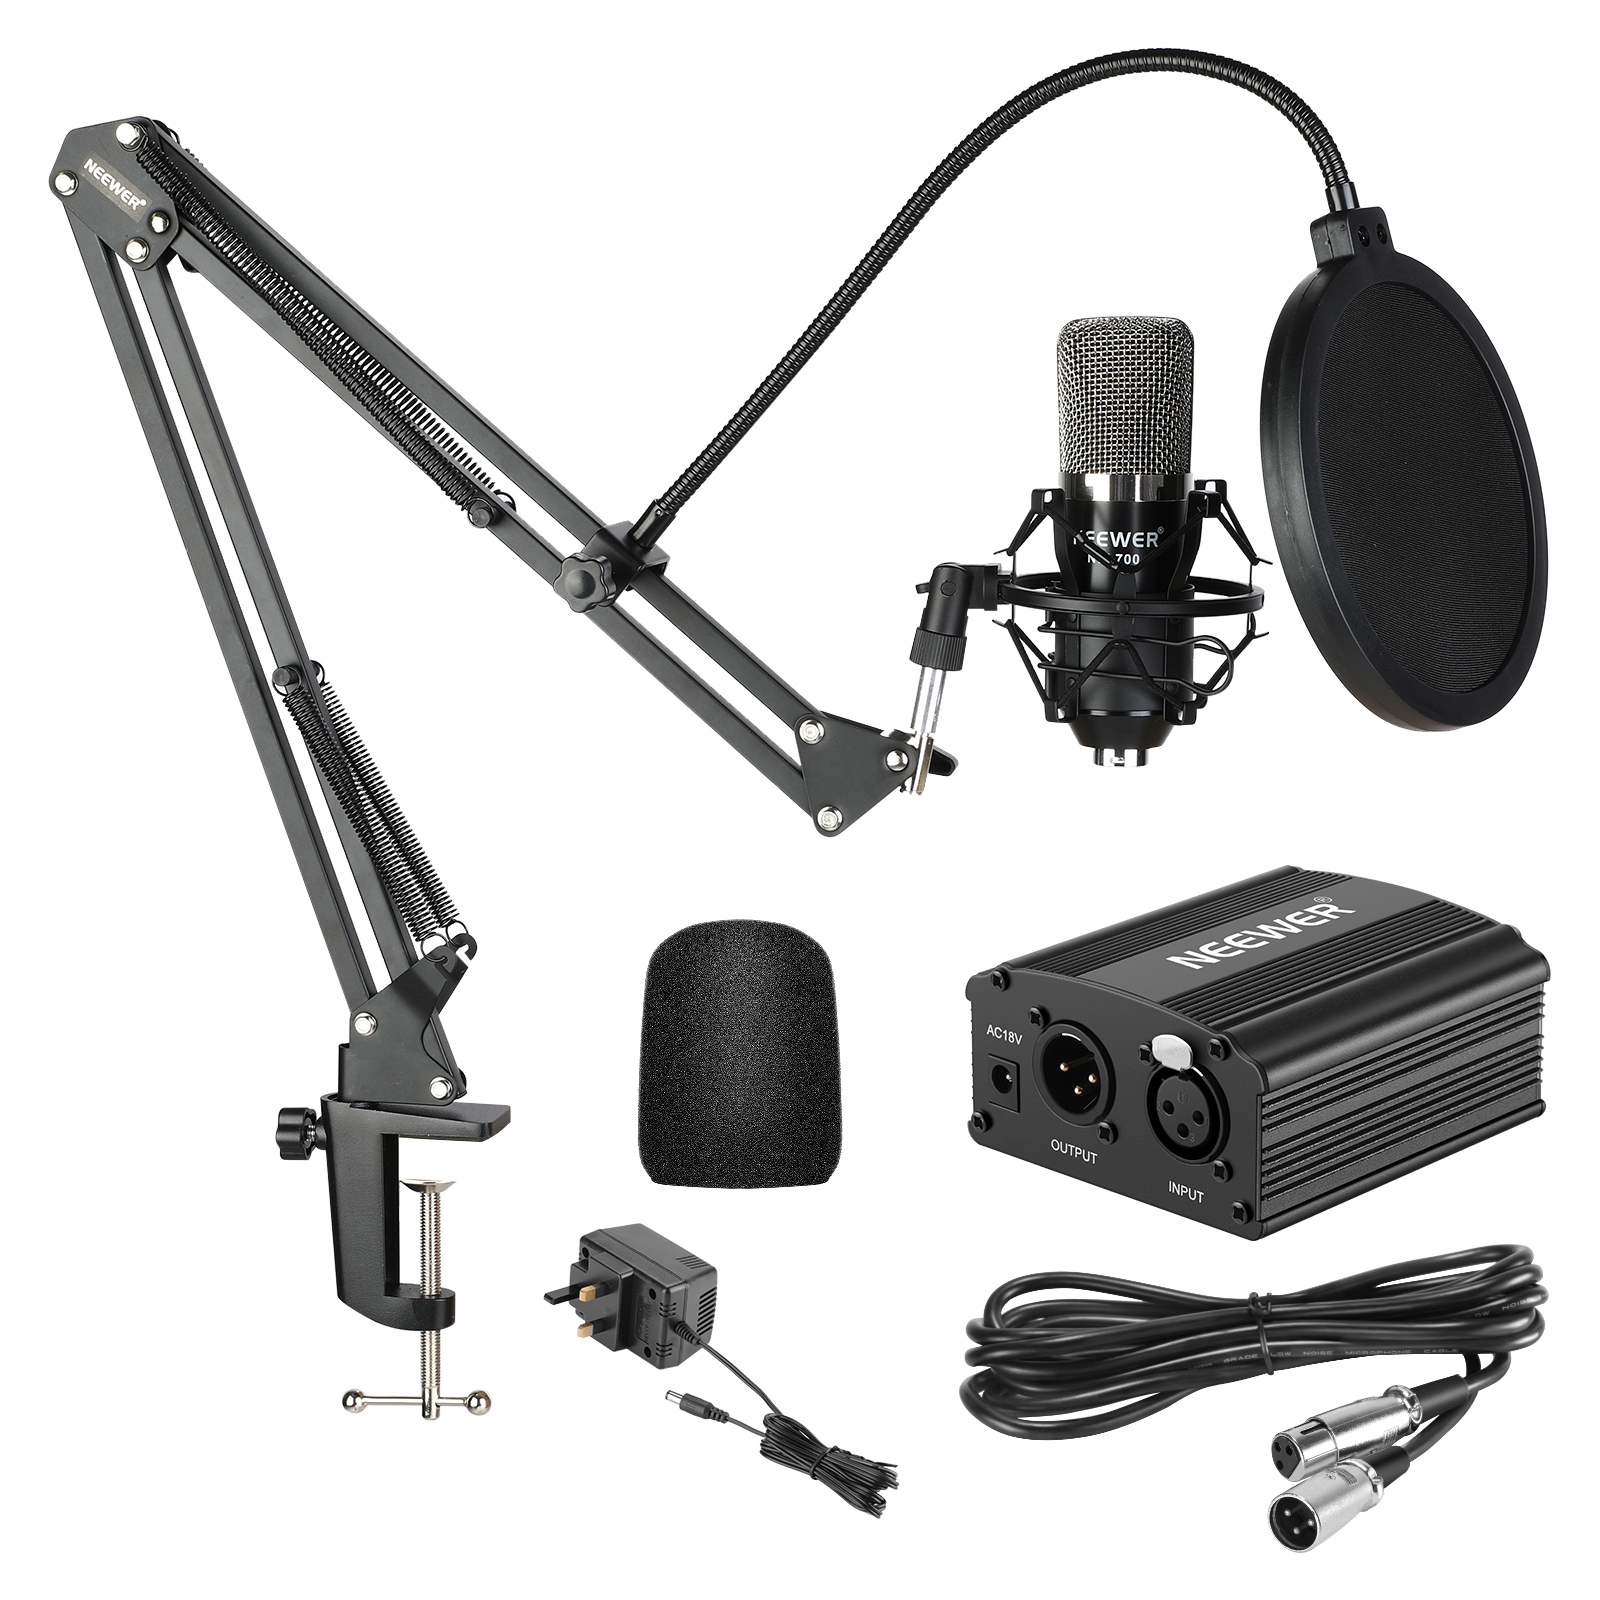 Neewer NW Condenser Microphone Kit For Studio Home Recording EBay